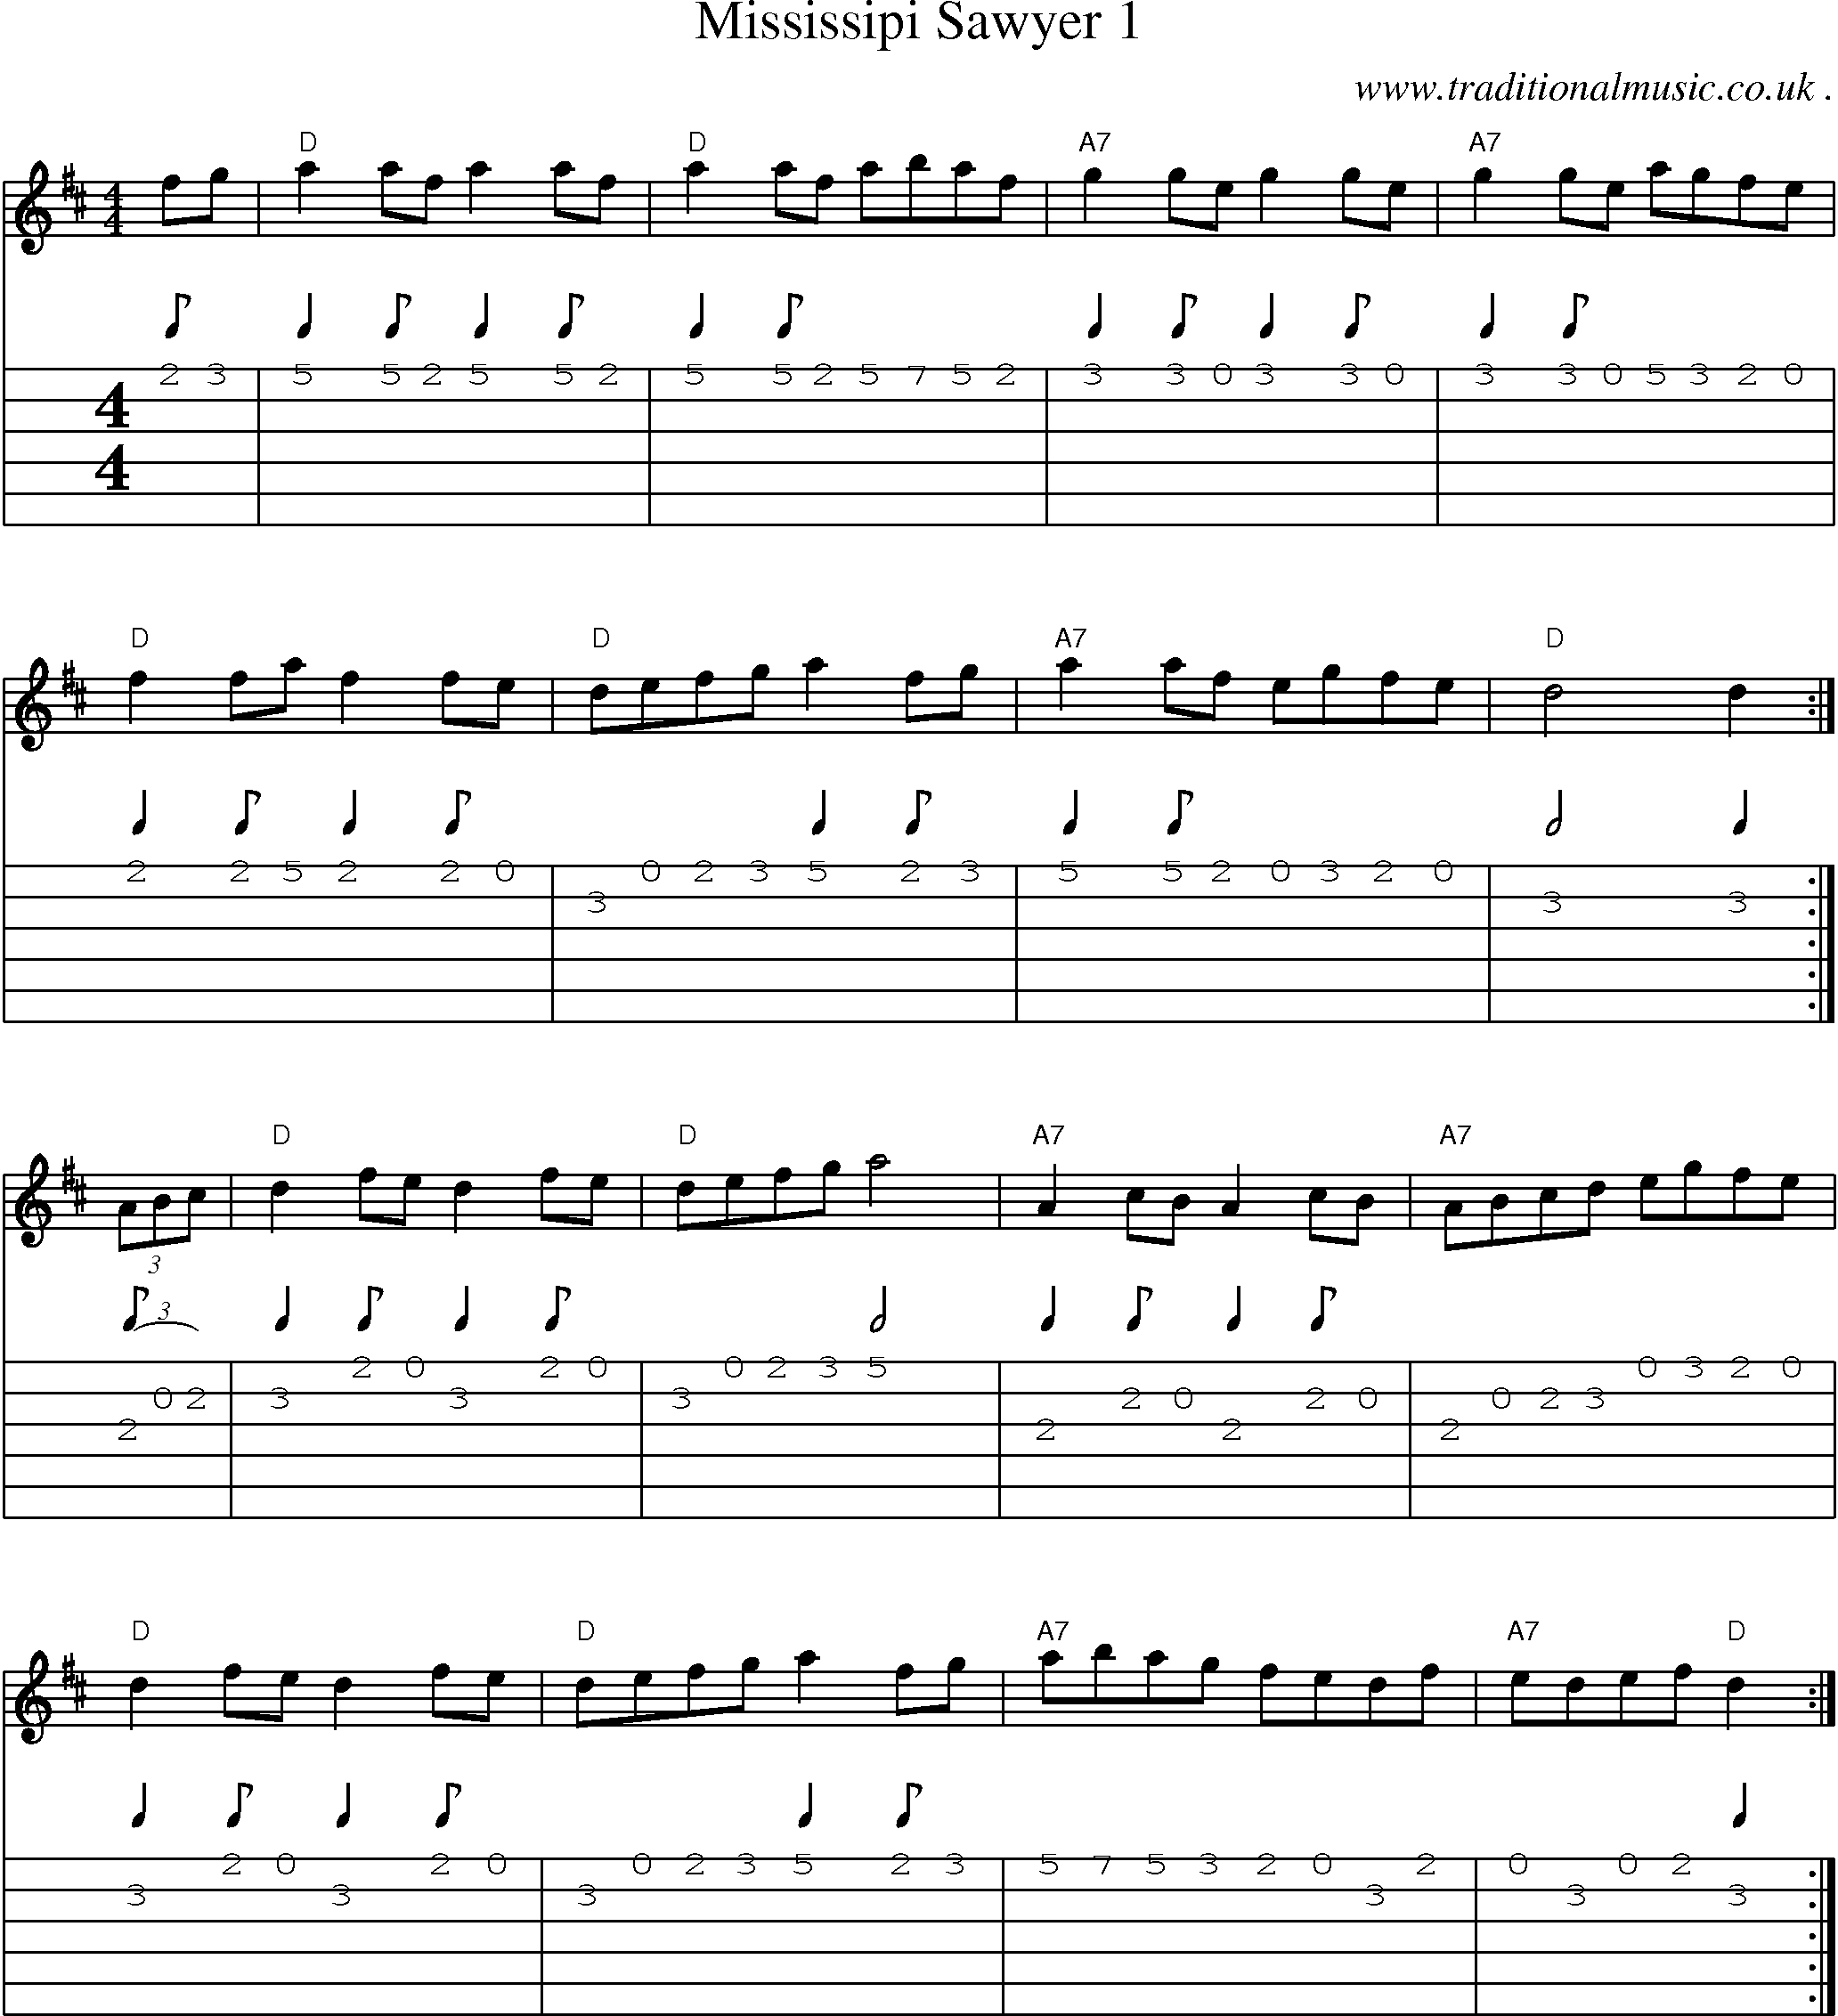 Music Score and Guitar Tabs for Mississipi Sawyer 1